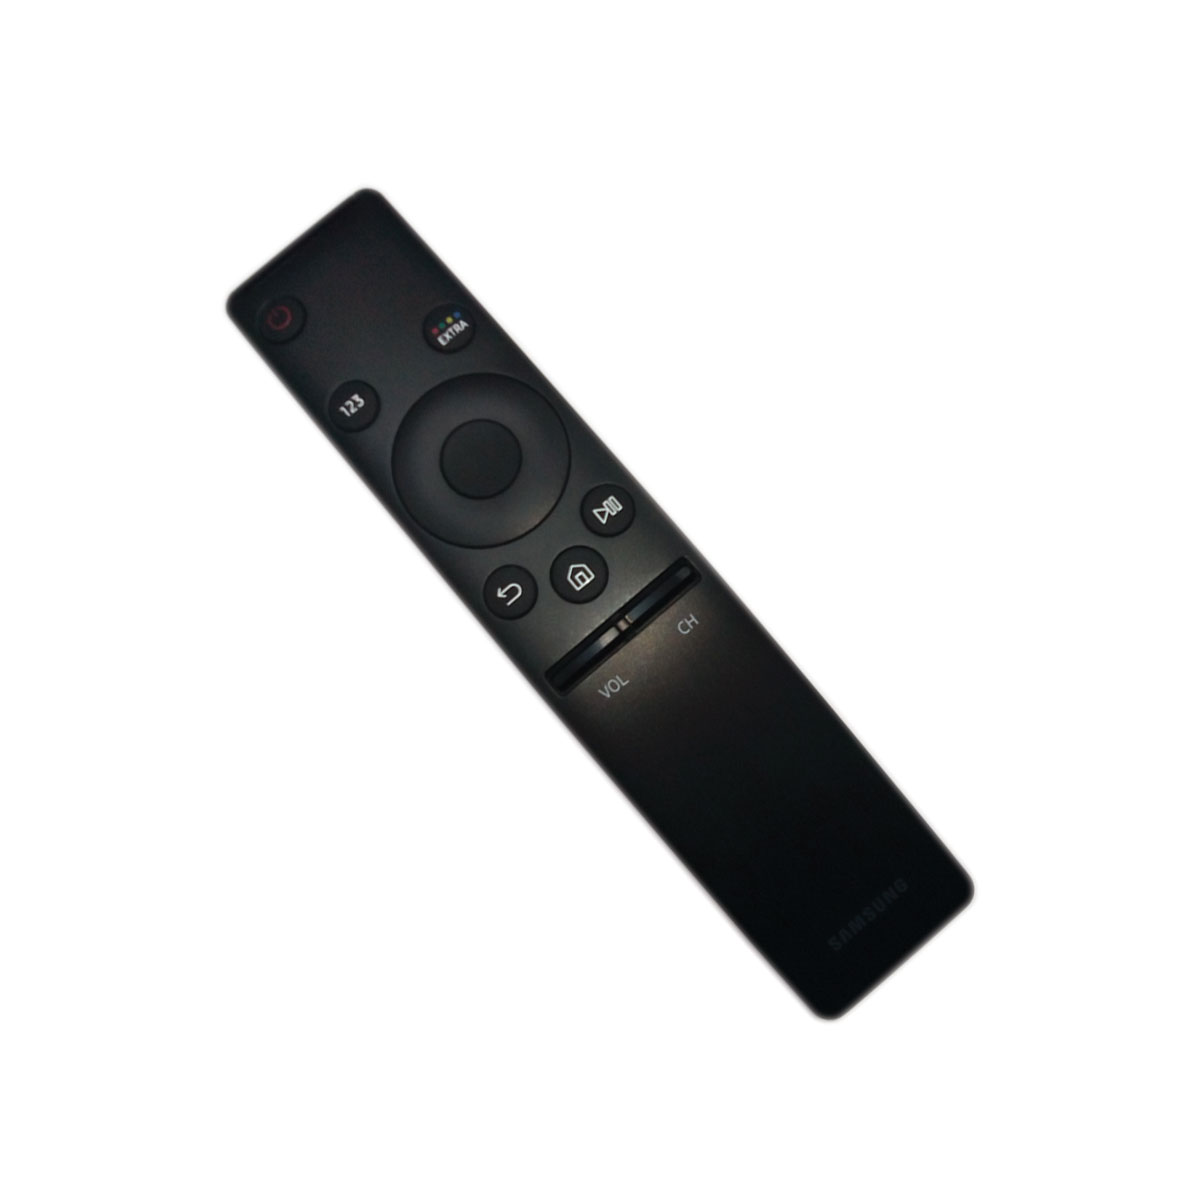 Thereby Infrared Foresee BN59-01259B-UE75/NU7179-NEW Original TV Remote Control for Samsung UE75/NU7179  Television